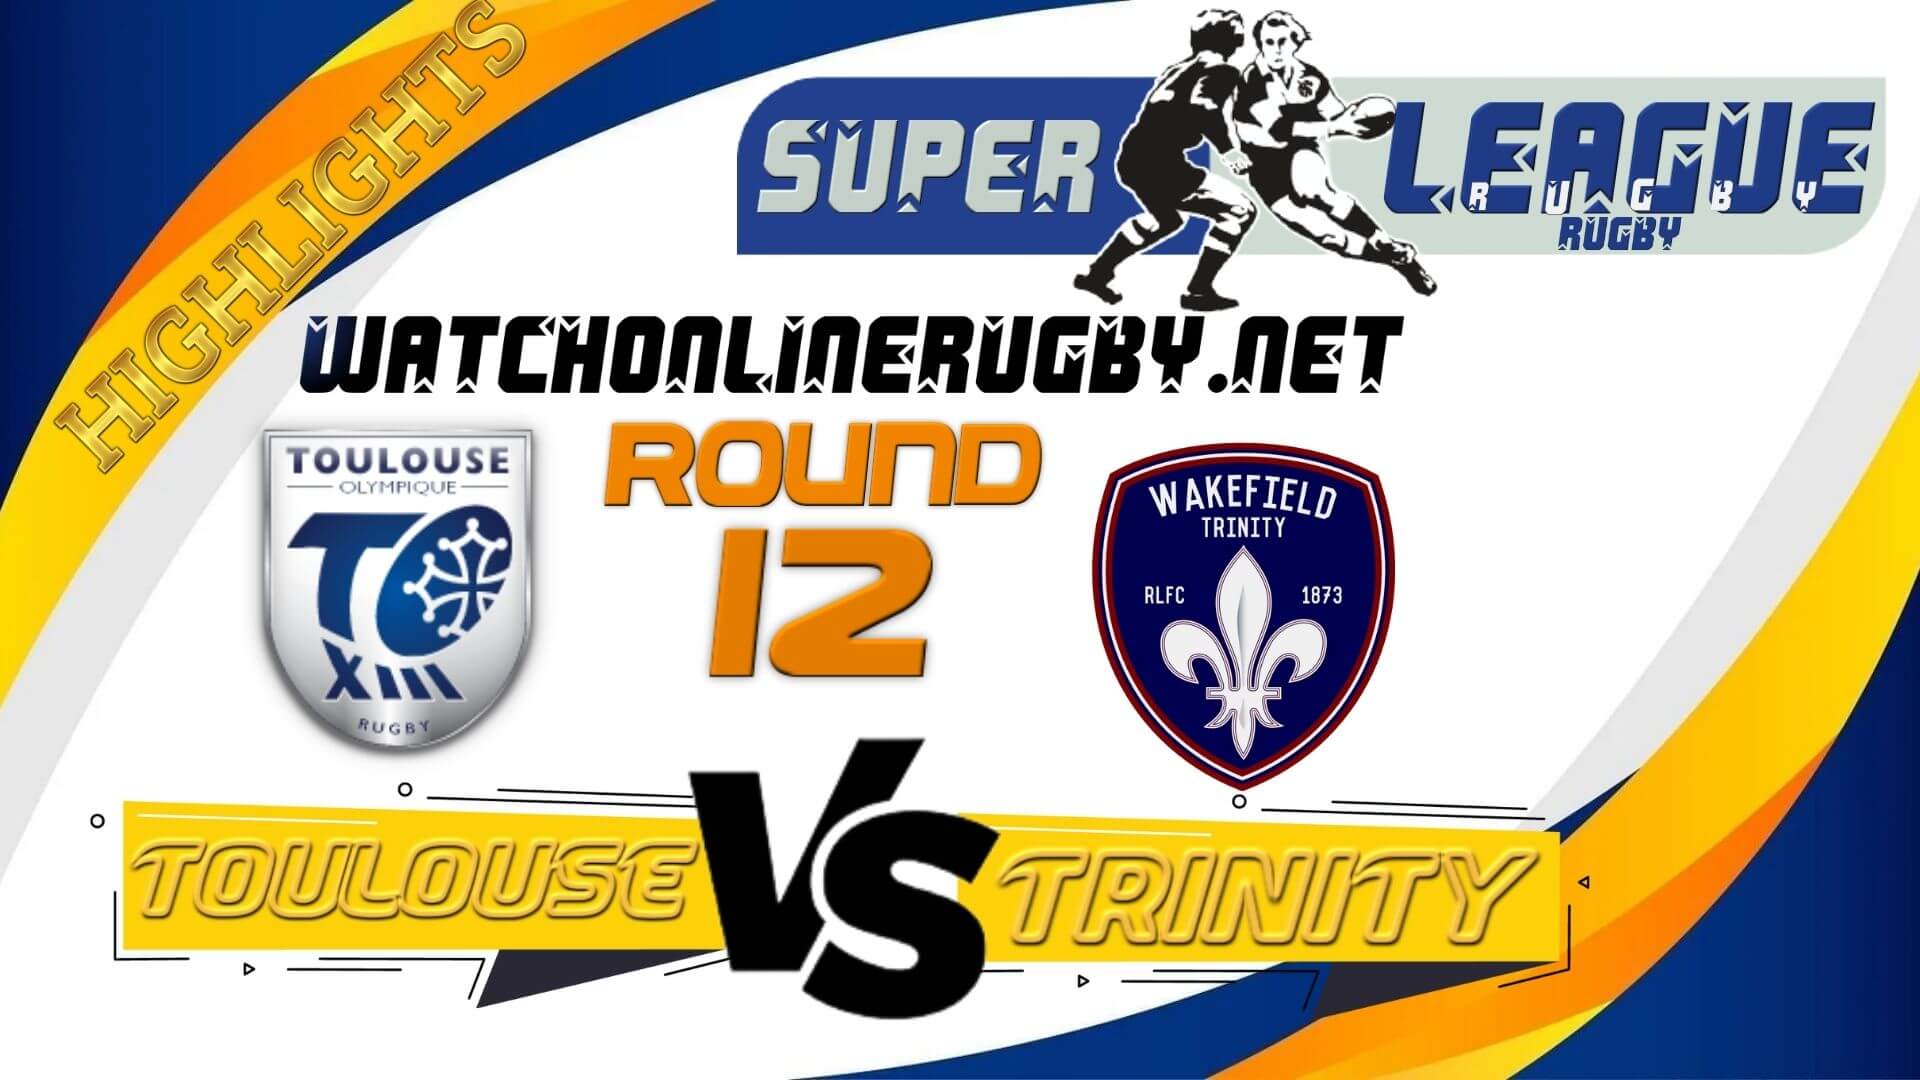 Toulouse Vs Wakefield Trinity Super League Rugby 2022 RD 12